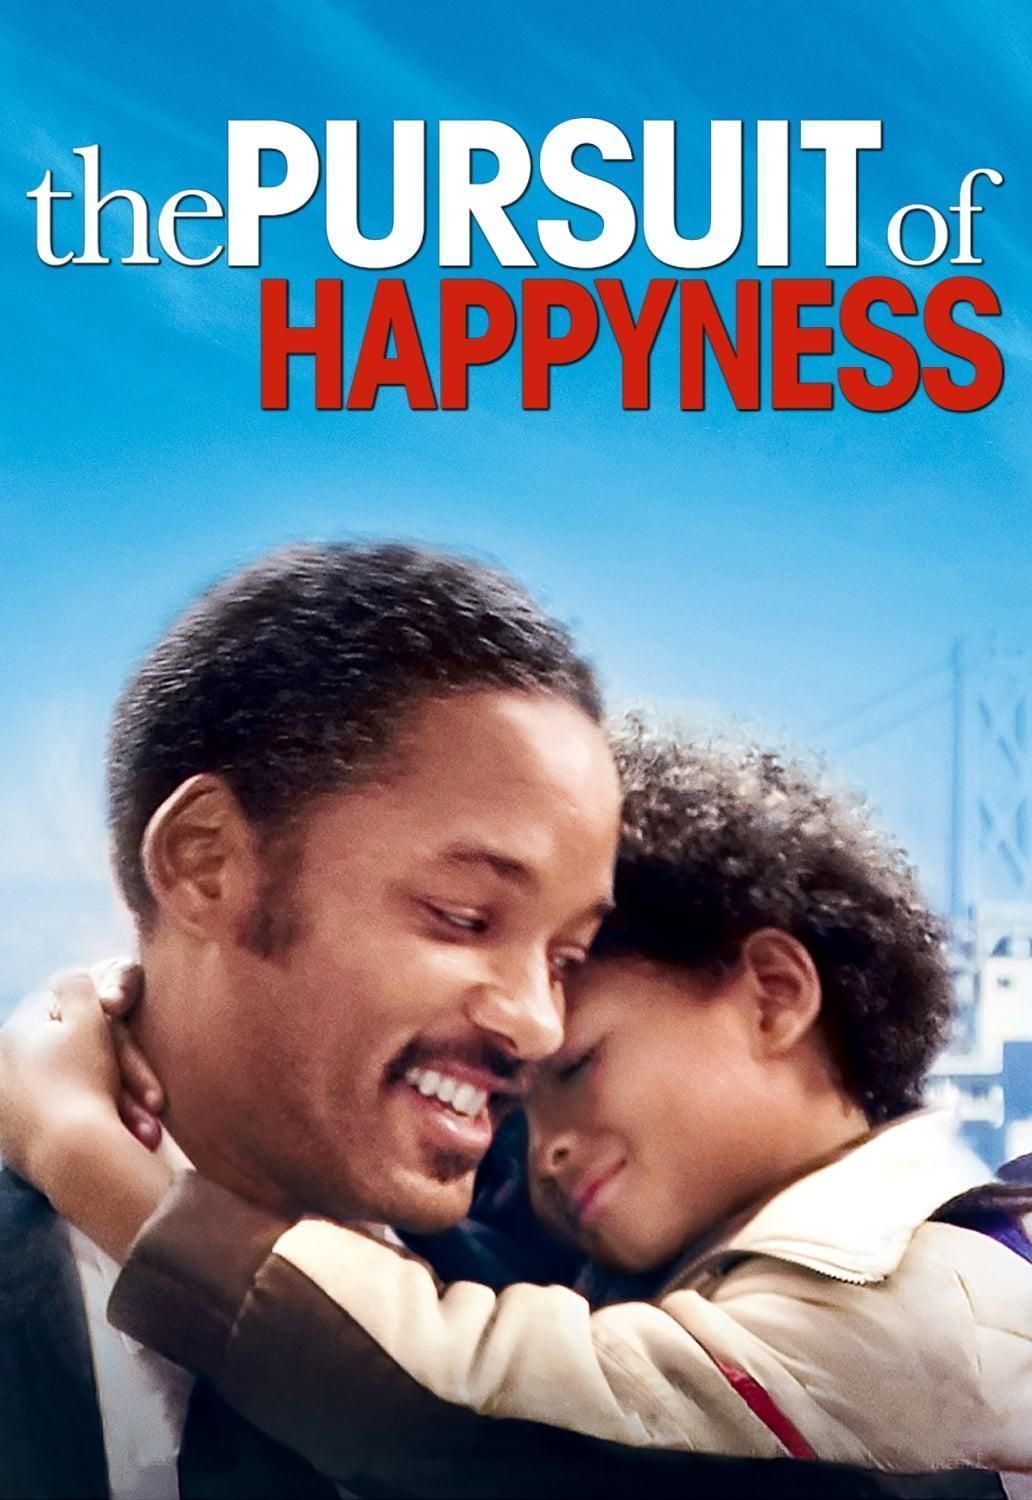 The Pursuit of Happyness' — A love letter to life - Daily Planet